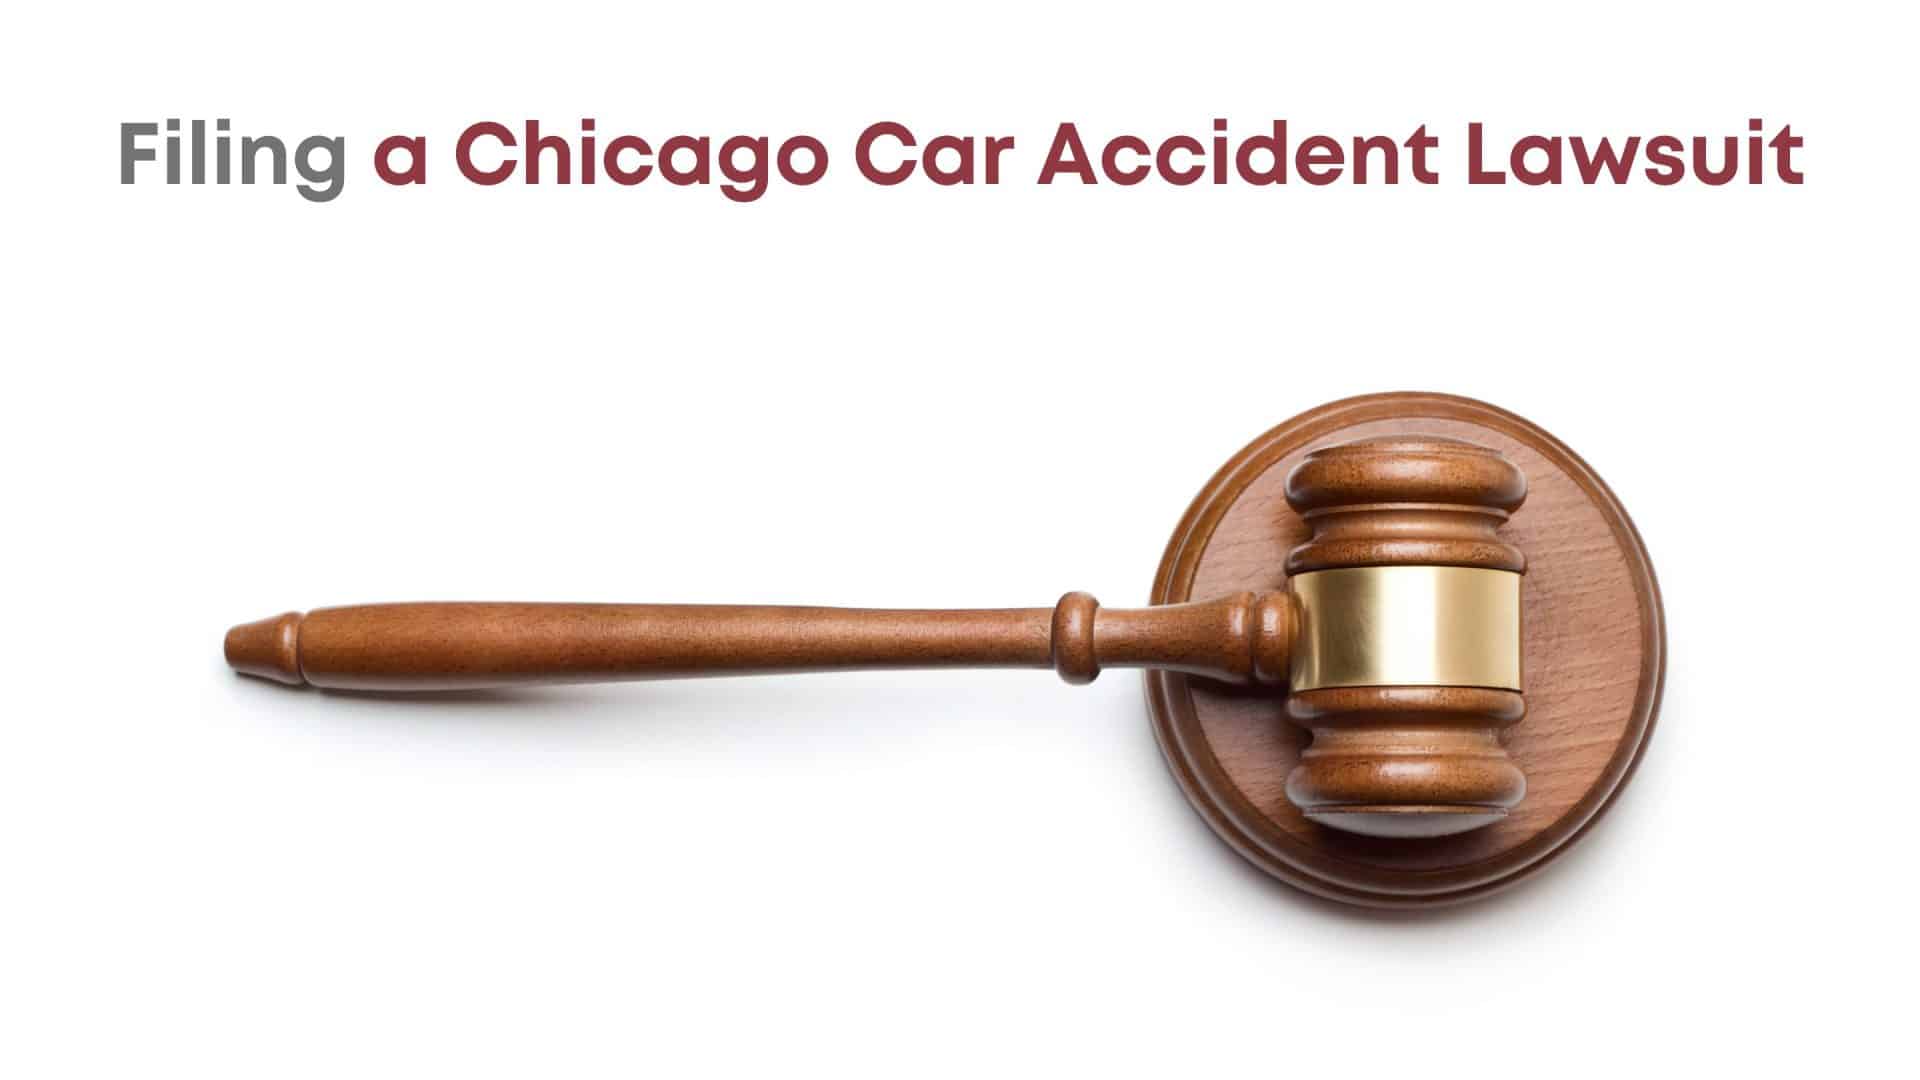 6 Steps in a filing Car Accident Lawsuit in Chicago